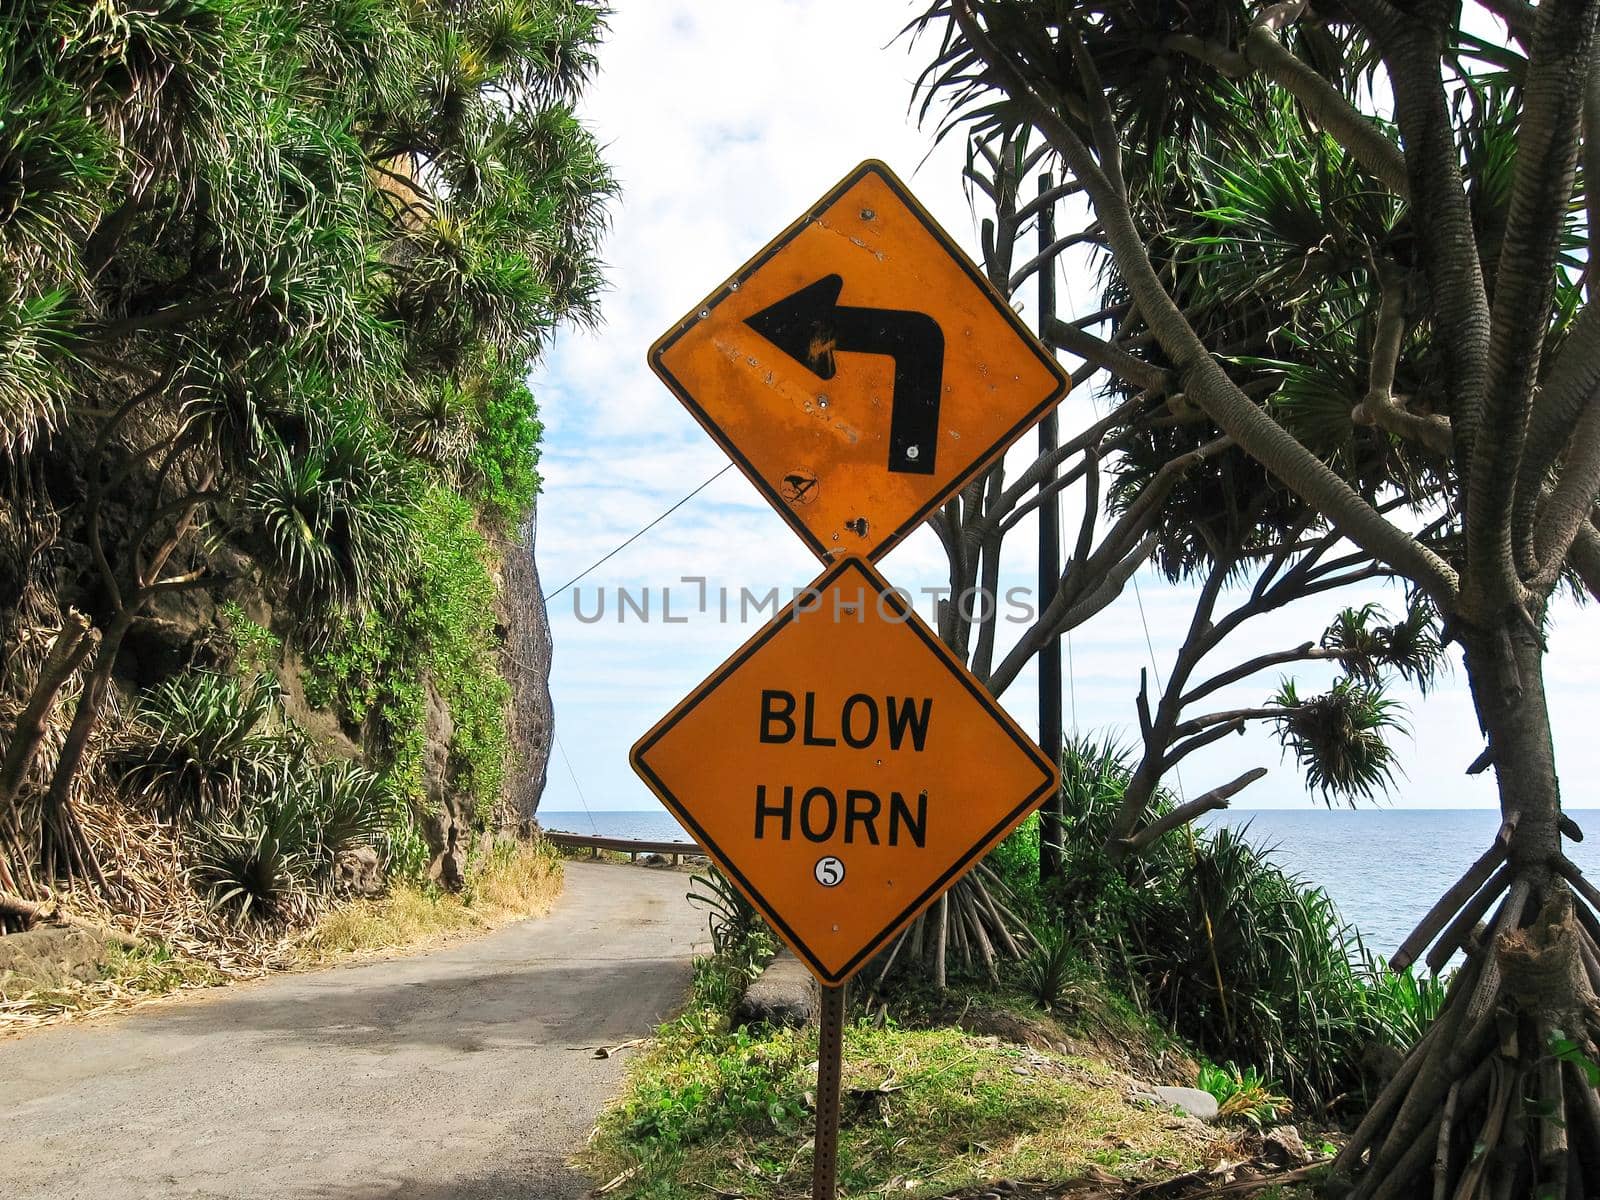 Warning Sign to Blow Horn Before Treacherous 90 Degree Turn on Narrow Road with Cliff Beside Ocean by markvandam